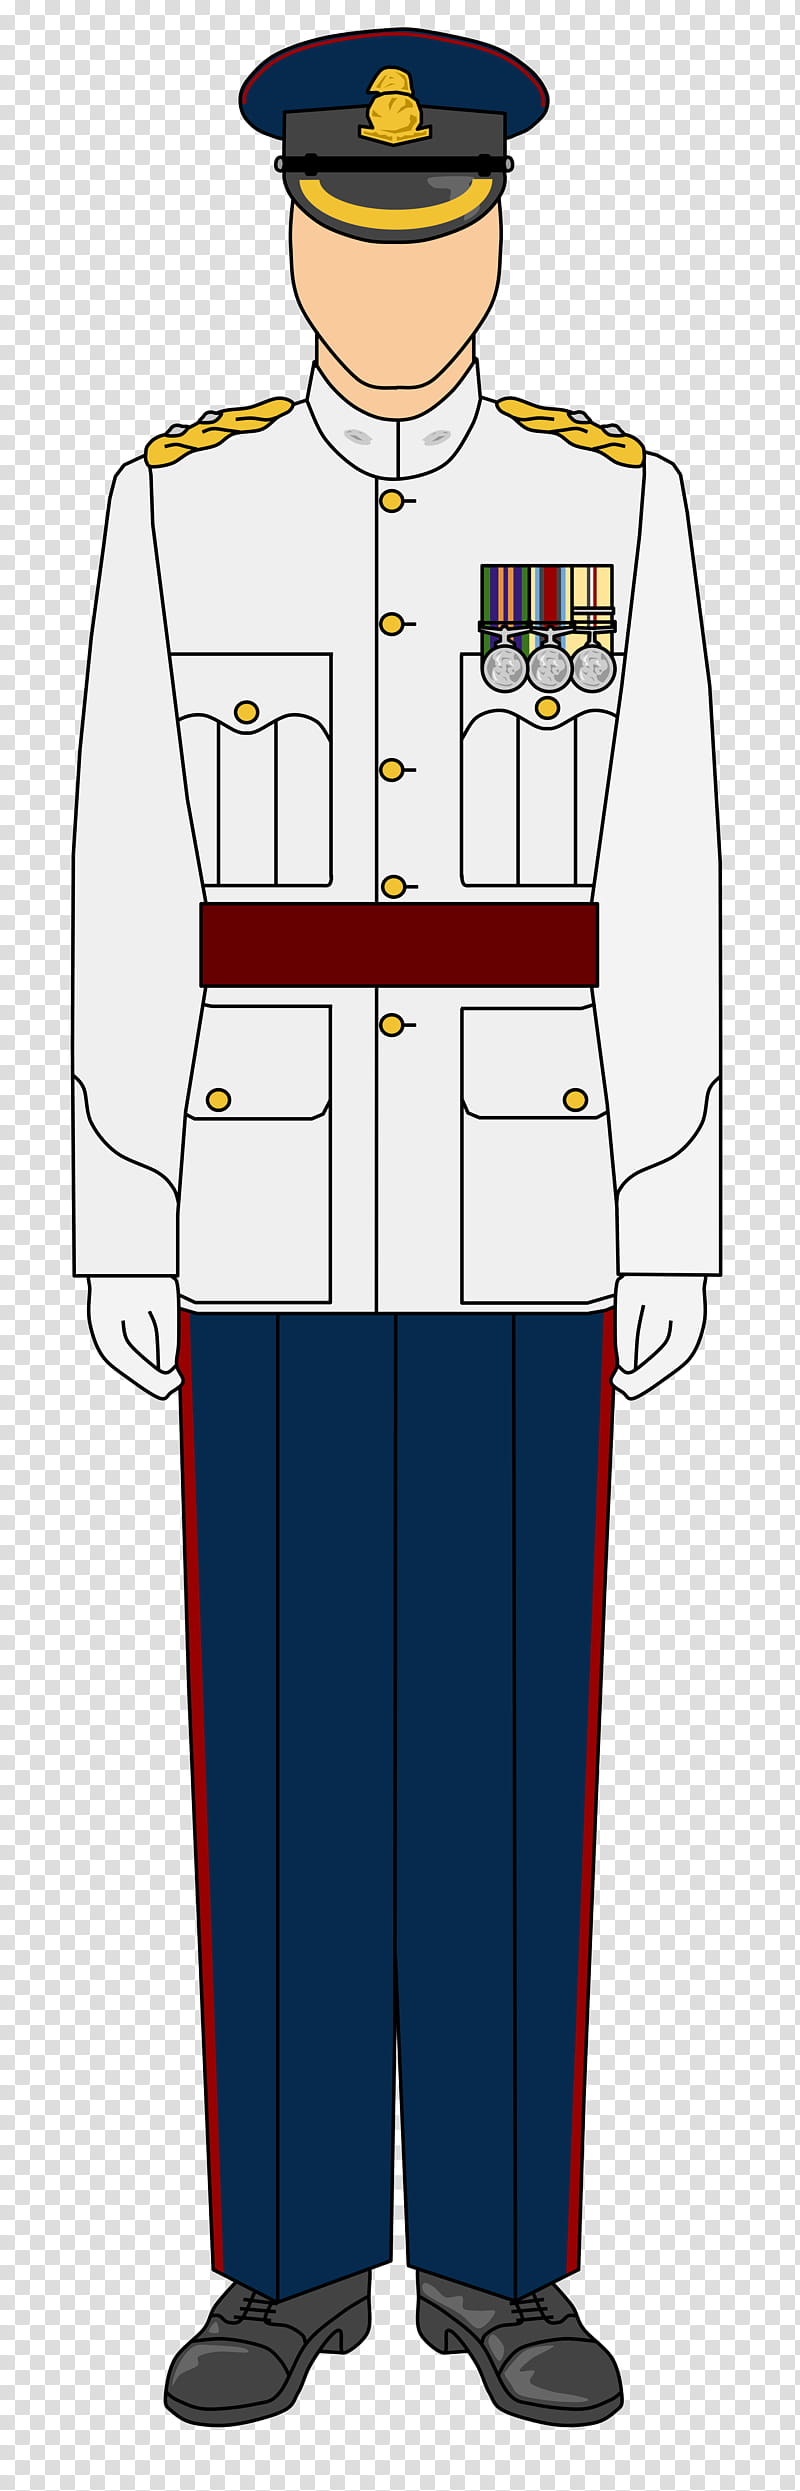 Army, Mess Dress Uniform, Full Dress Uniform, Service Dress, Uniforms Of The British Army, Military Uniforms, Army Service Uniform, British Army Mess Dress transparent background PNG clipart